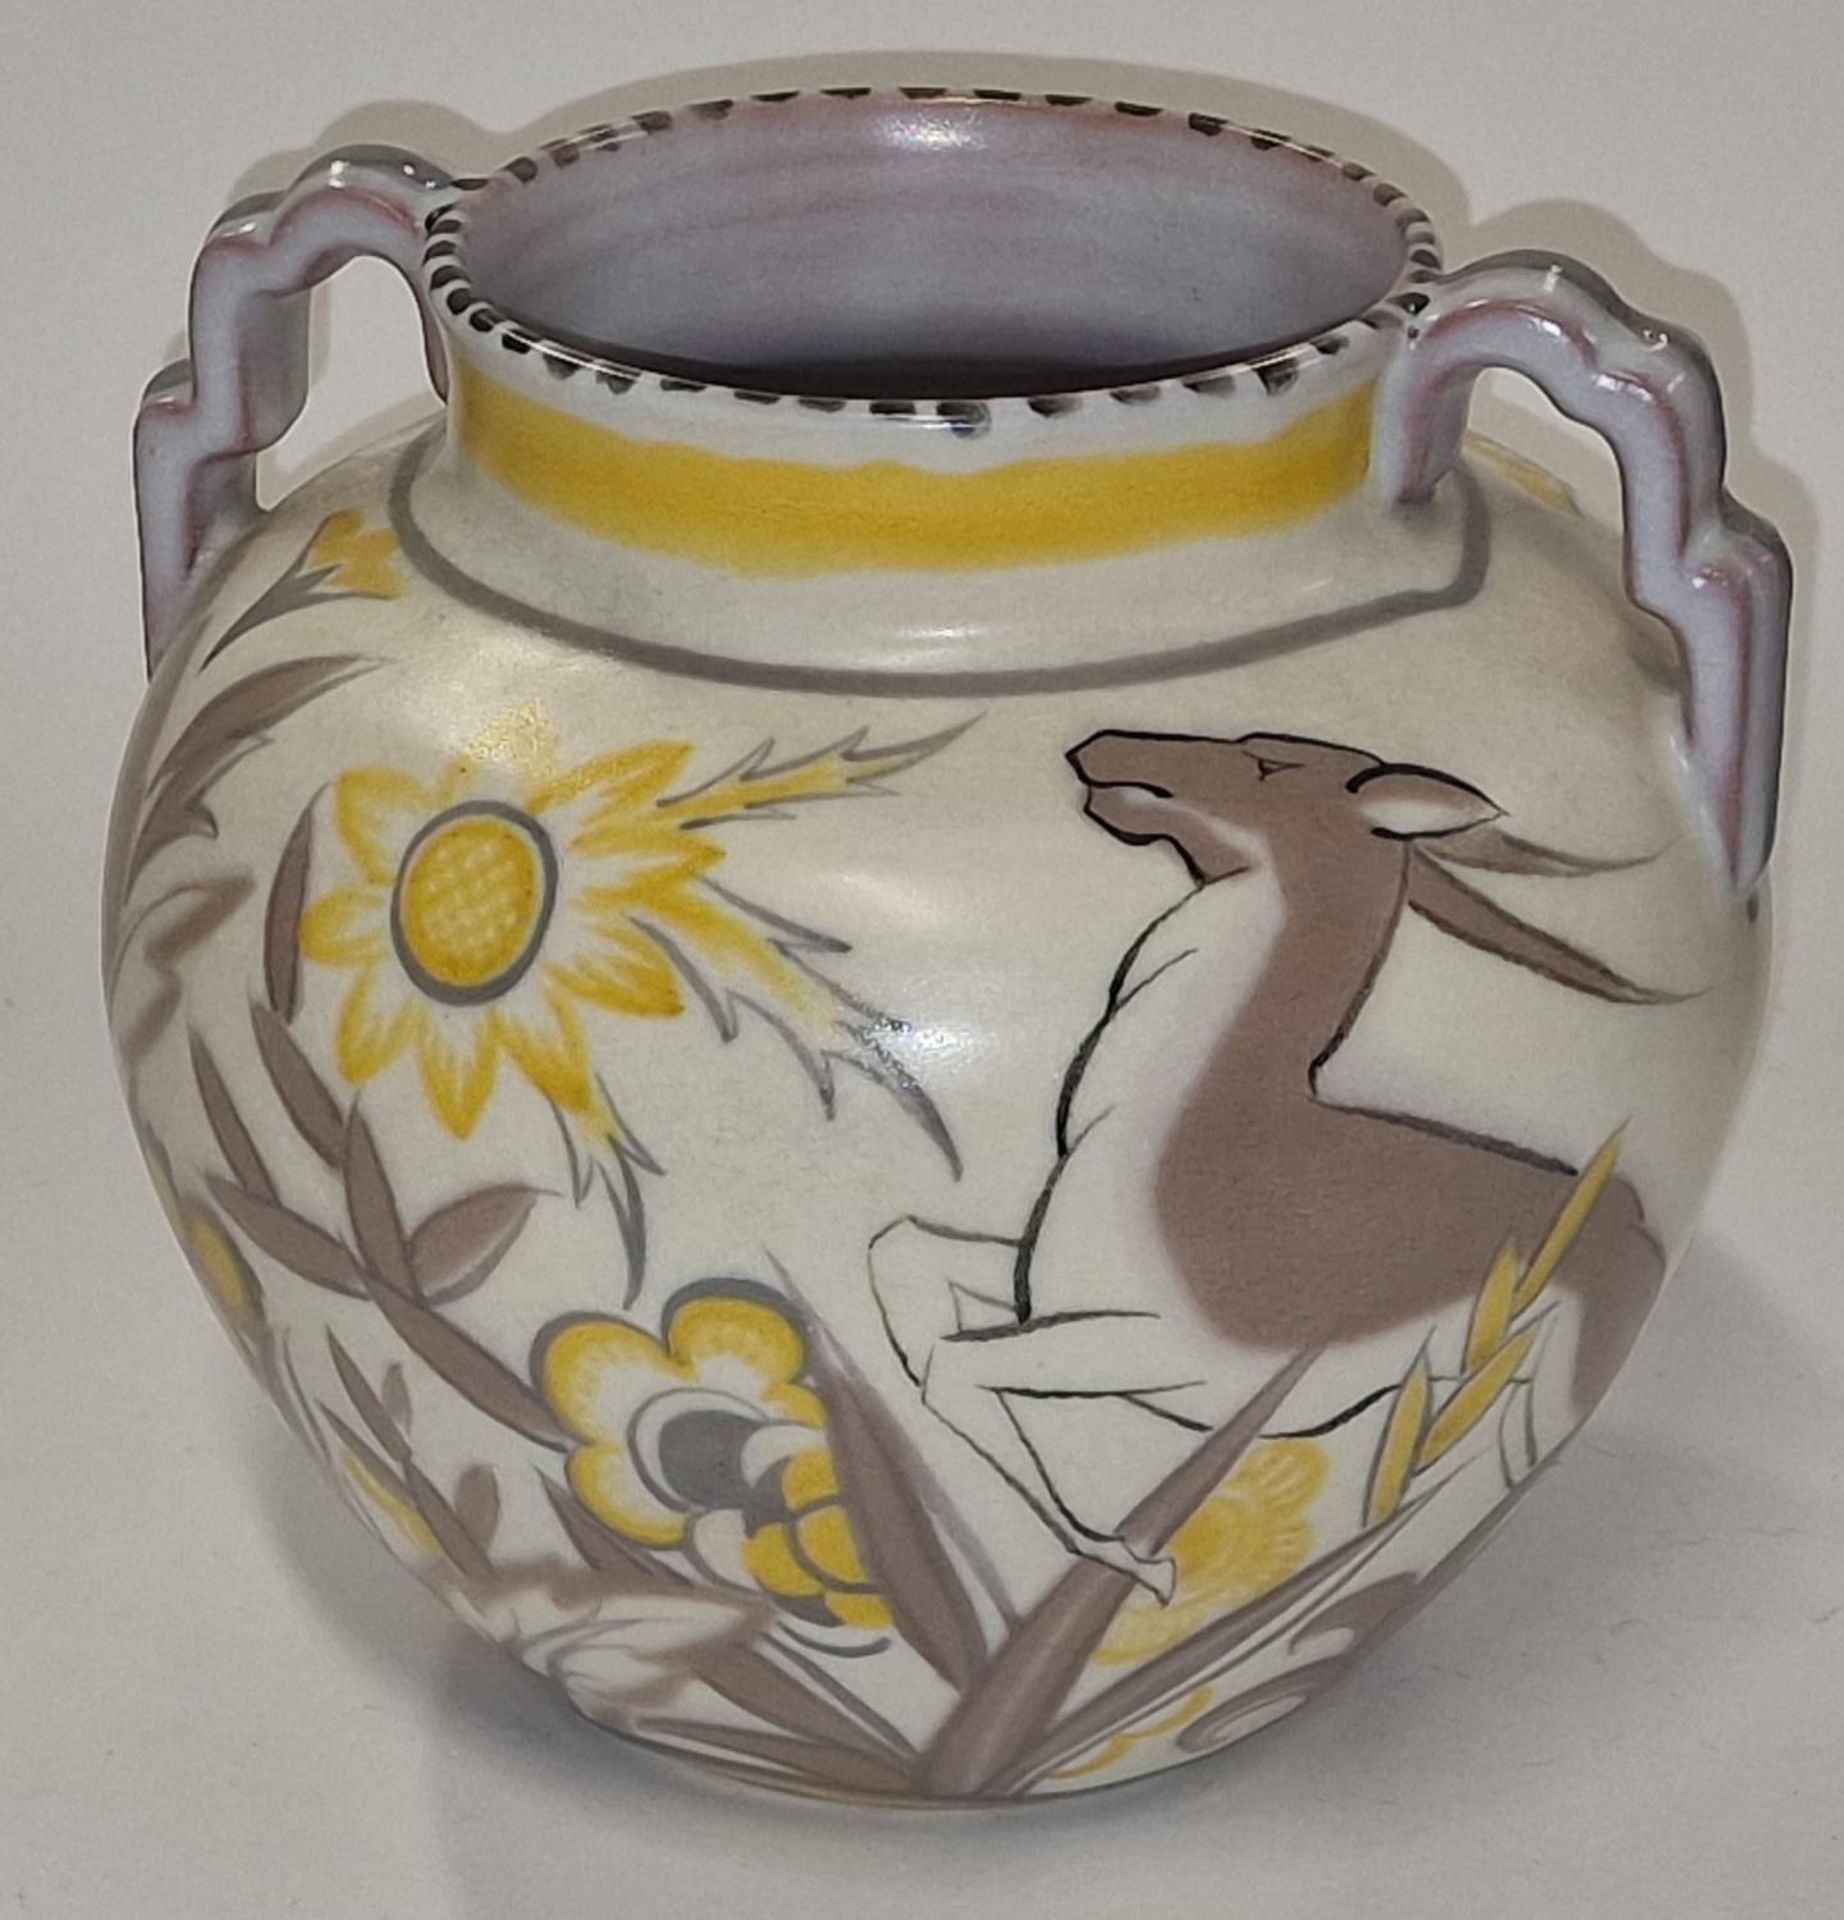 Poole Pottery Carter Stabler Adams shape 973 NO pattern twin step-handled vase decorated by Anne - Image 2 of 3